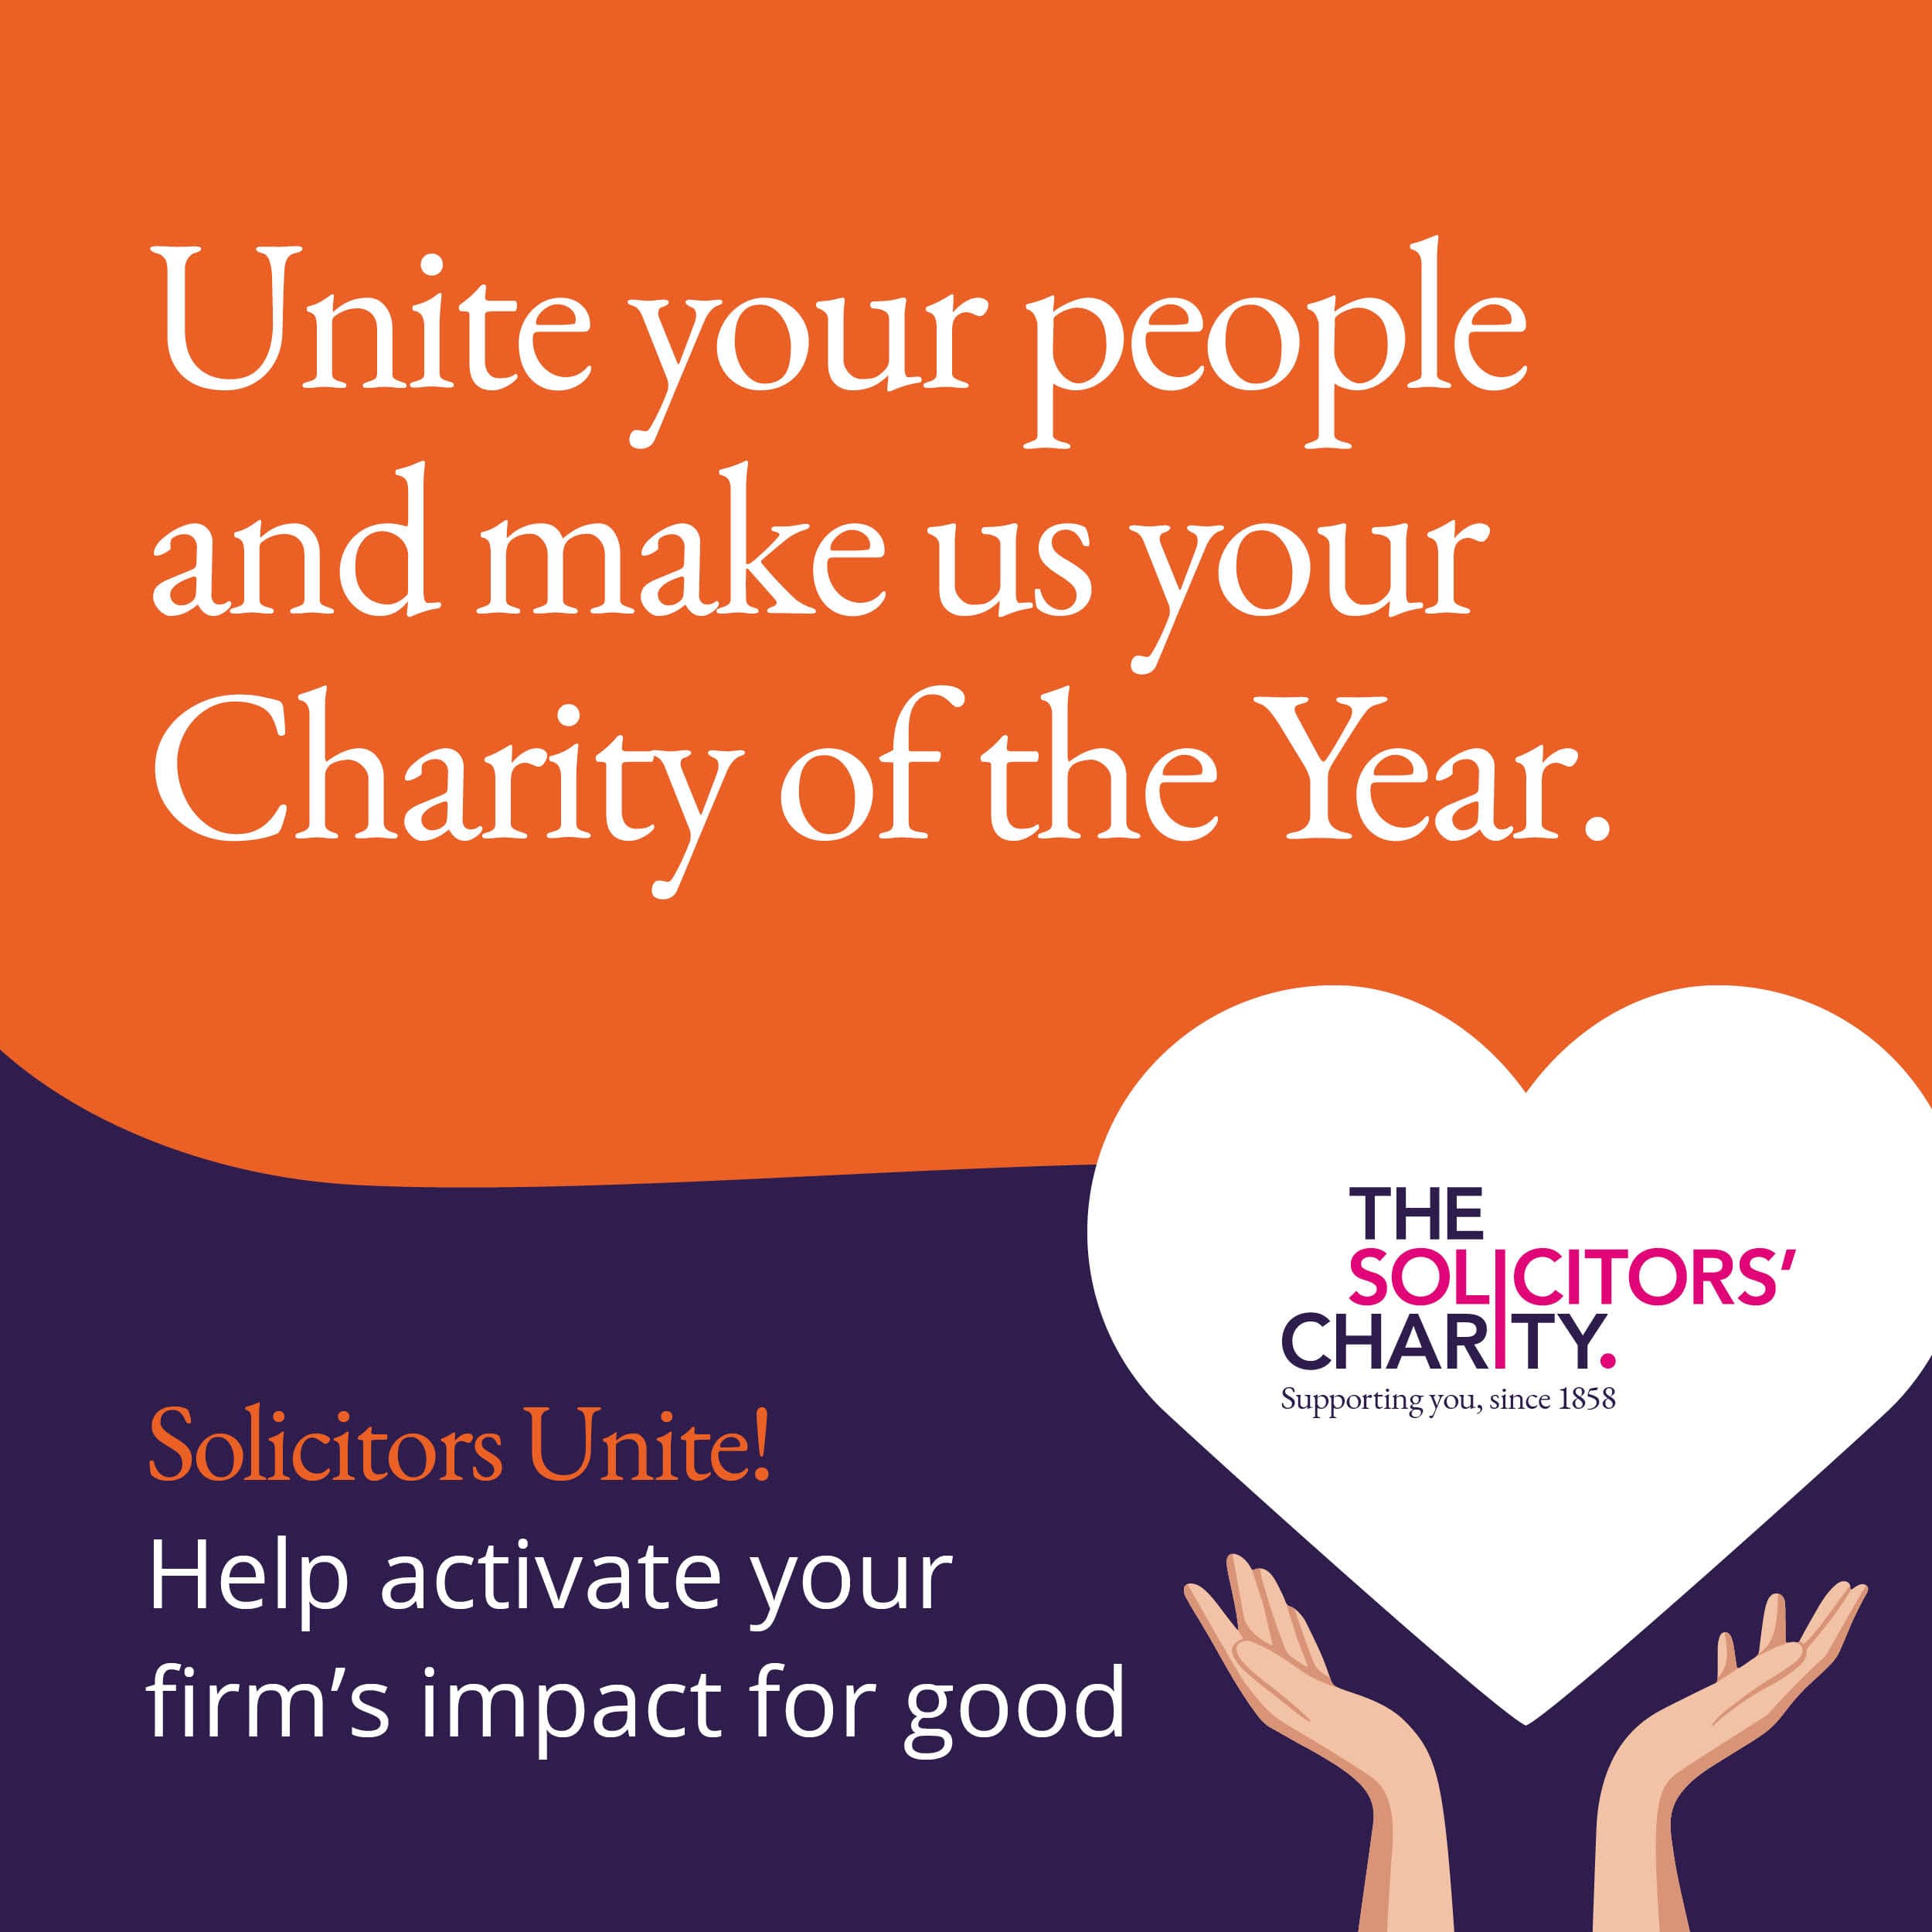 Unite your people and make us your Charity of the Year